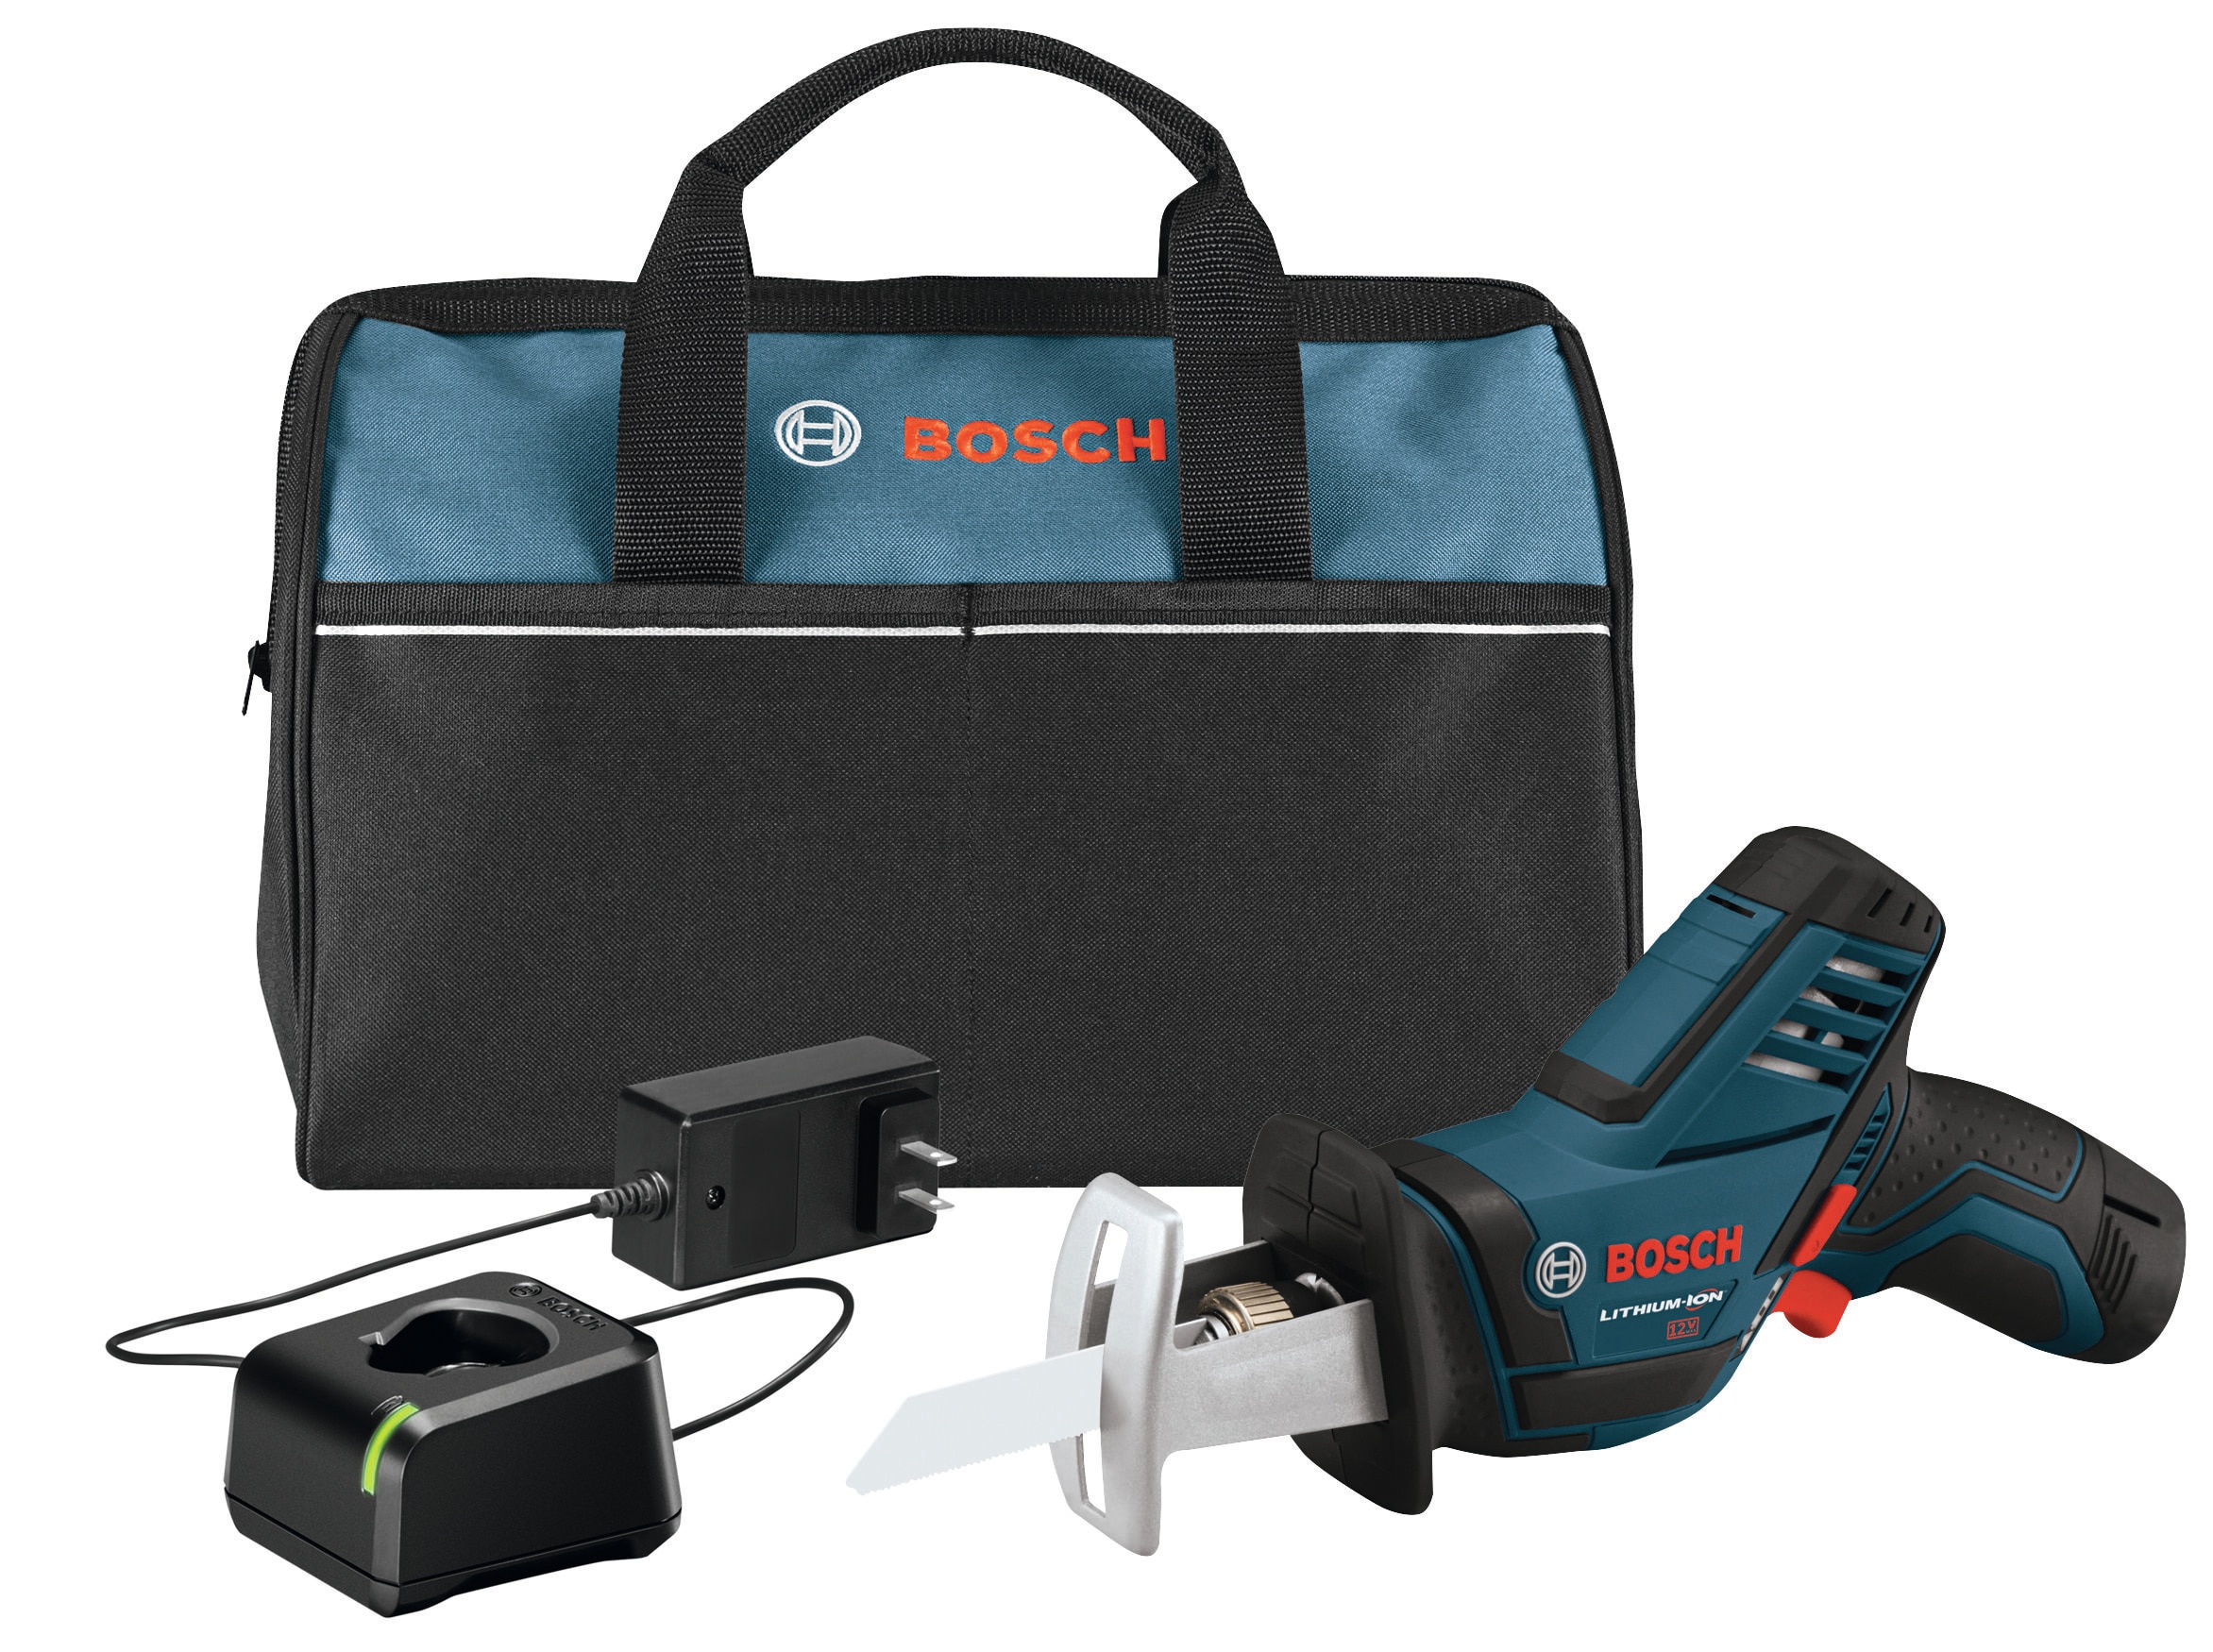 Bosch Professional Power Tools and Accessories - The Professional 12V  System offers you all the performance you need in a handy and compact  format. These light, user-friendly tools are the ideal choice